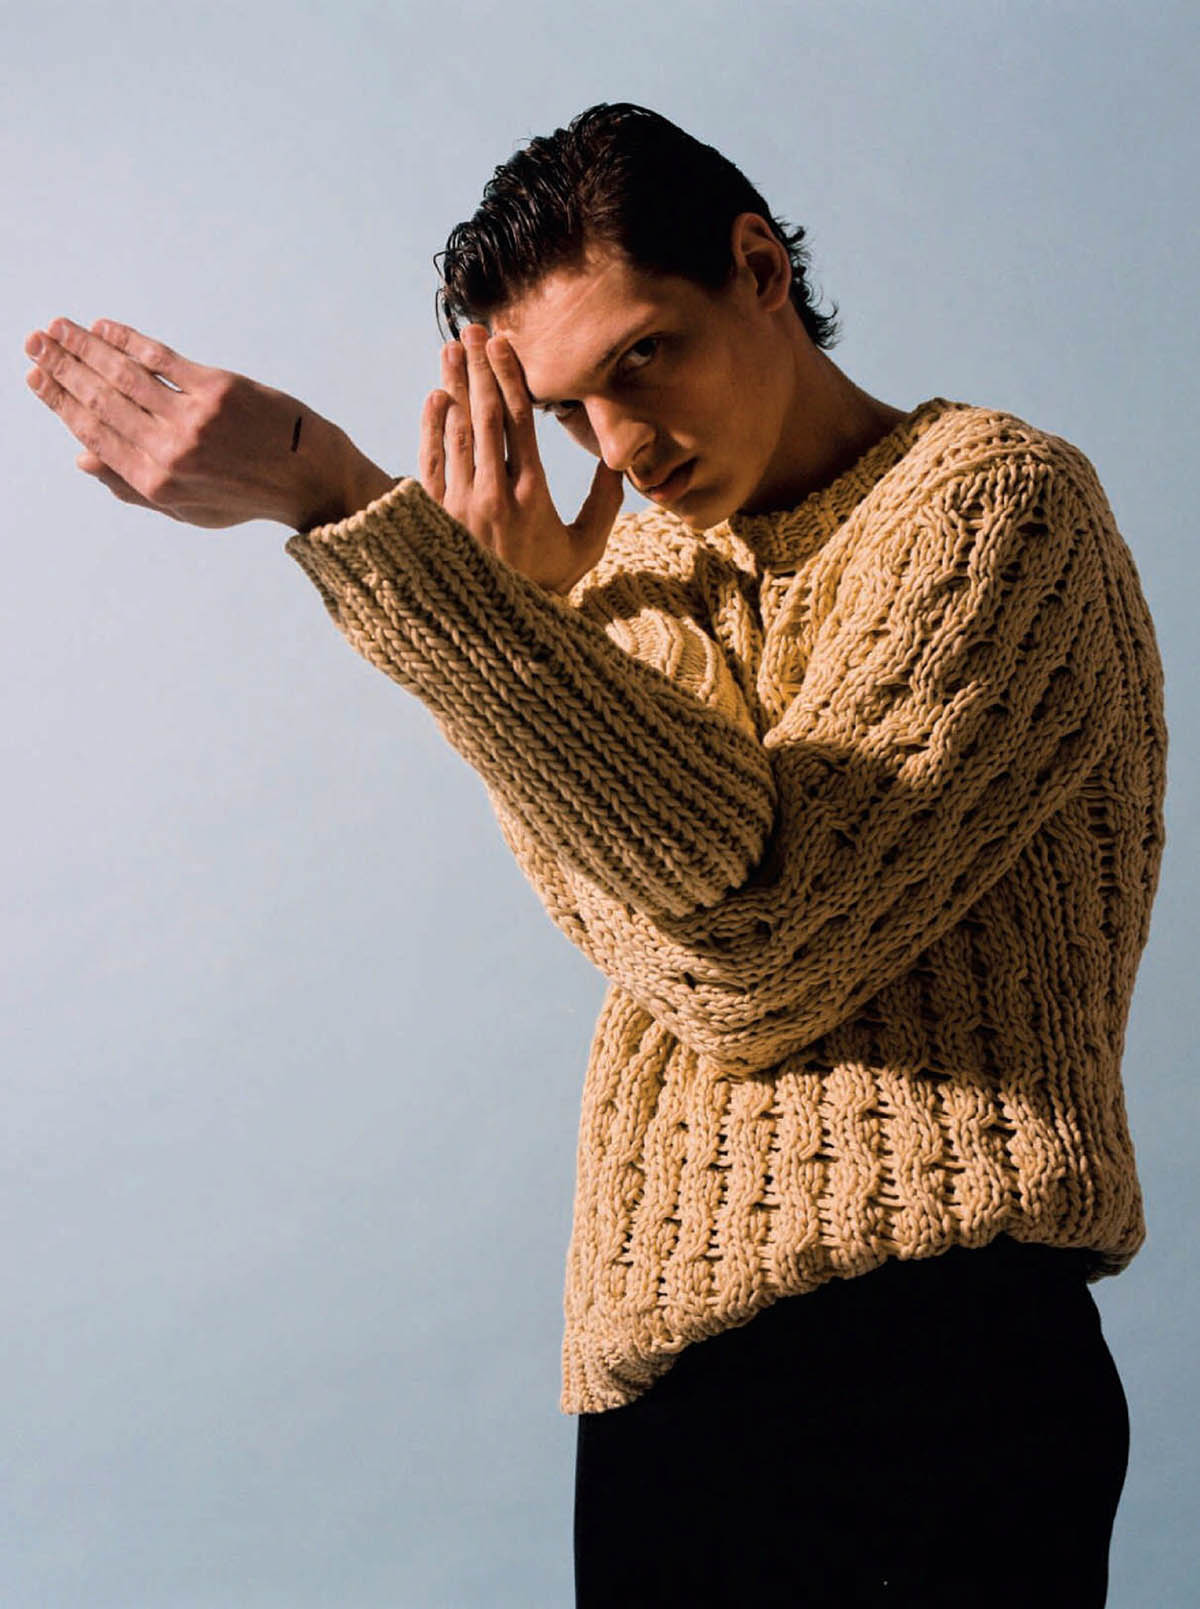 Valentin Caron by Javier Castán for Esquire Spain March 2021